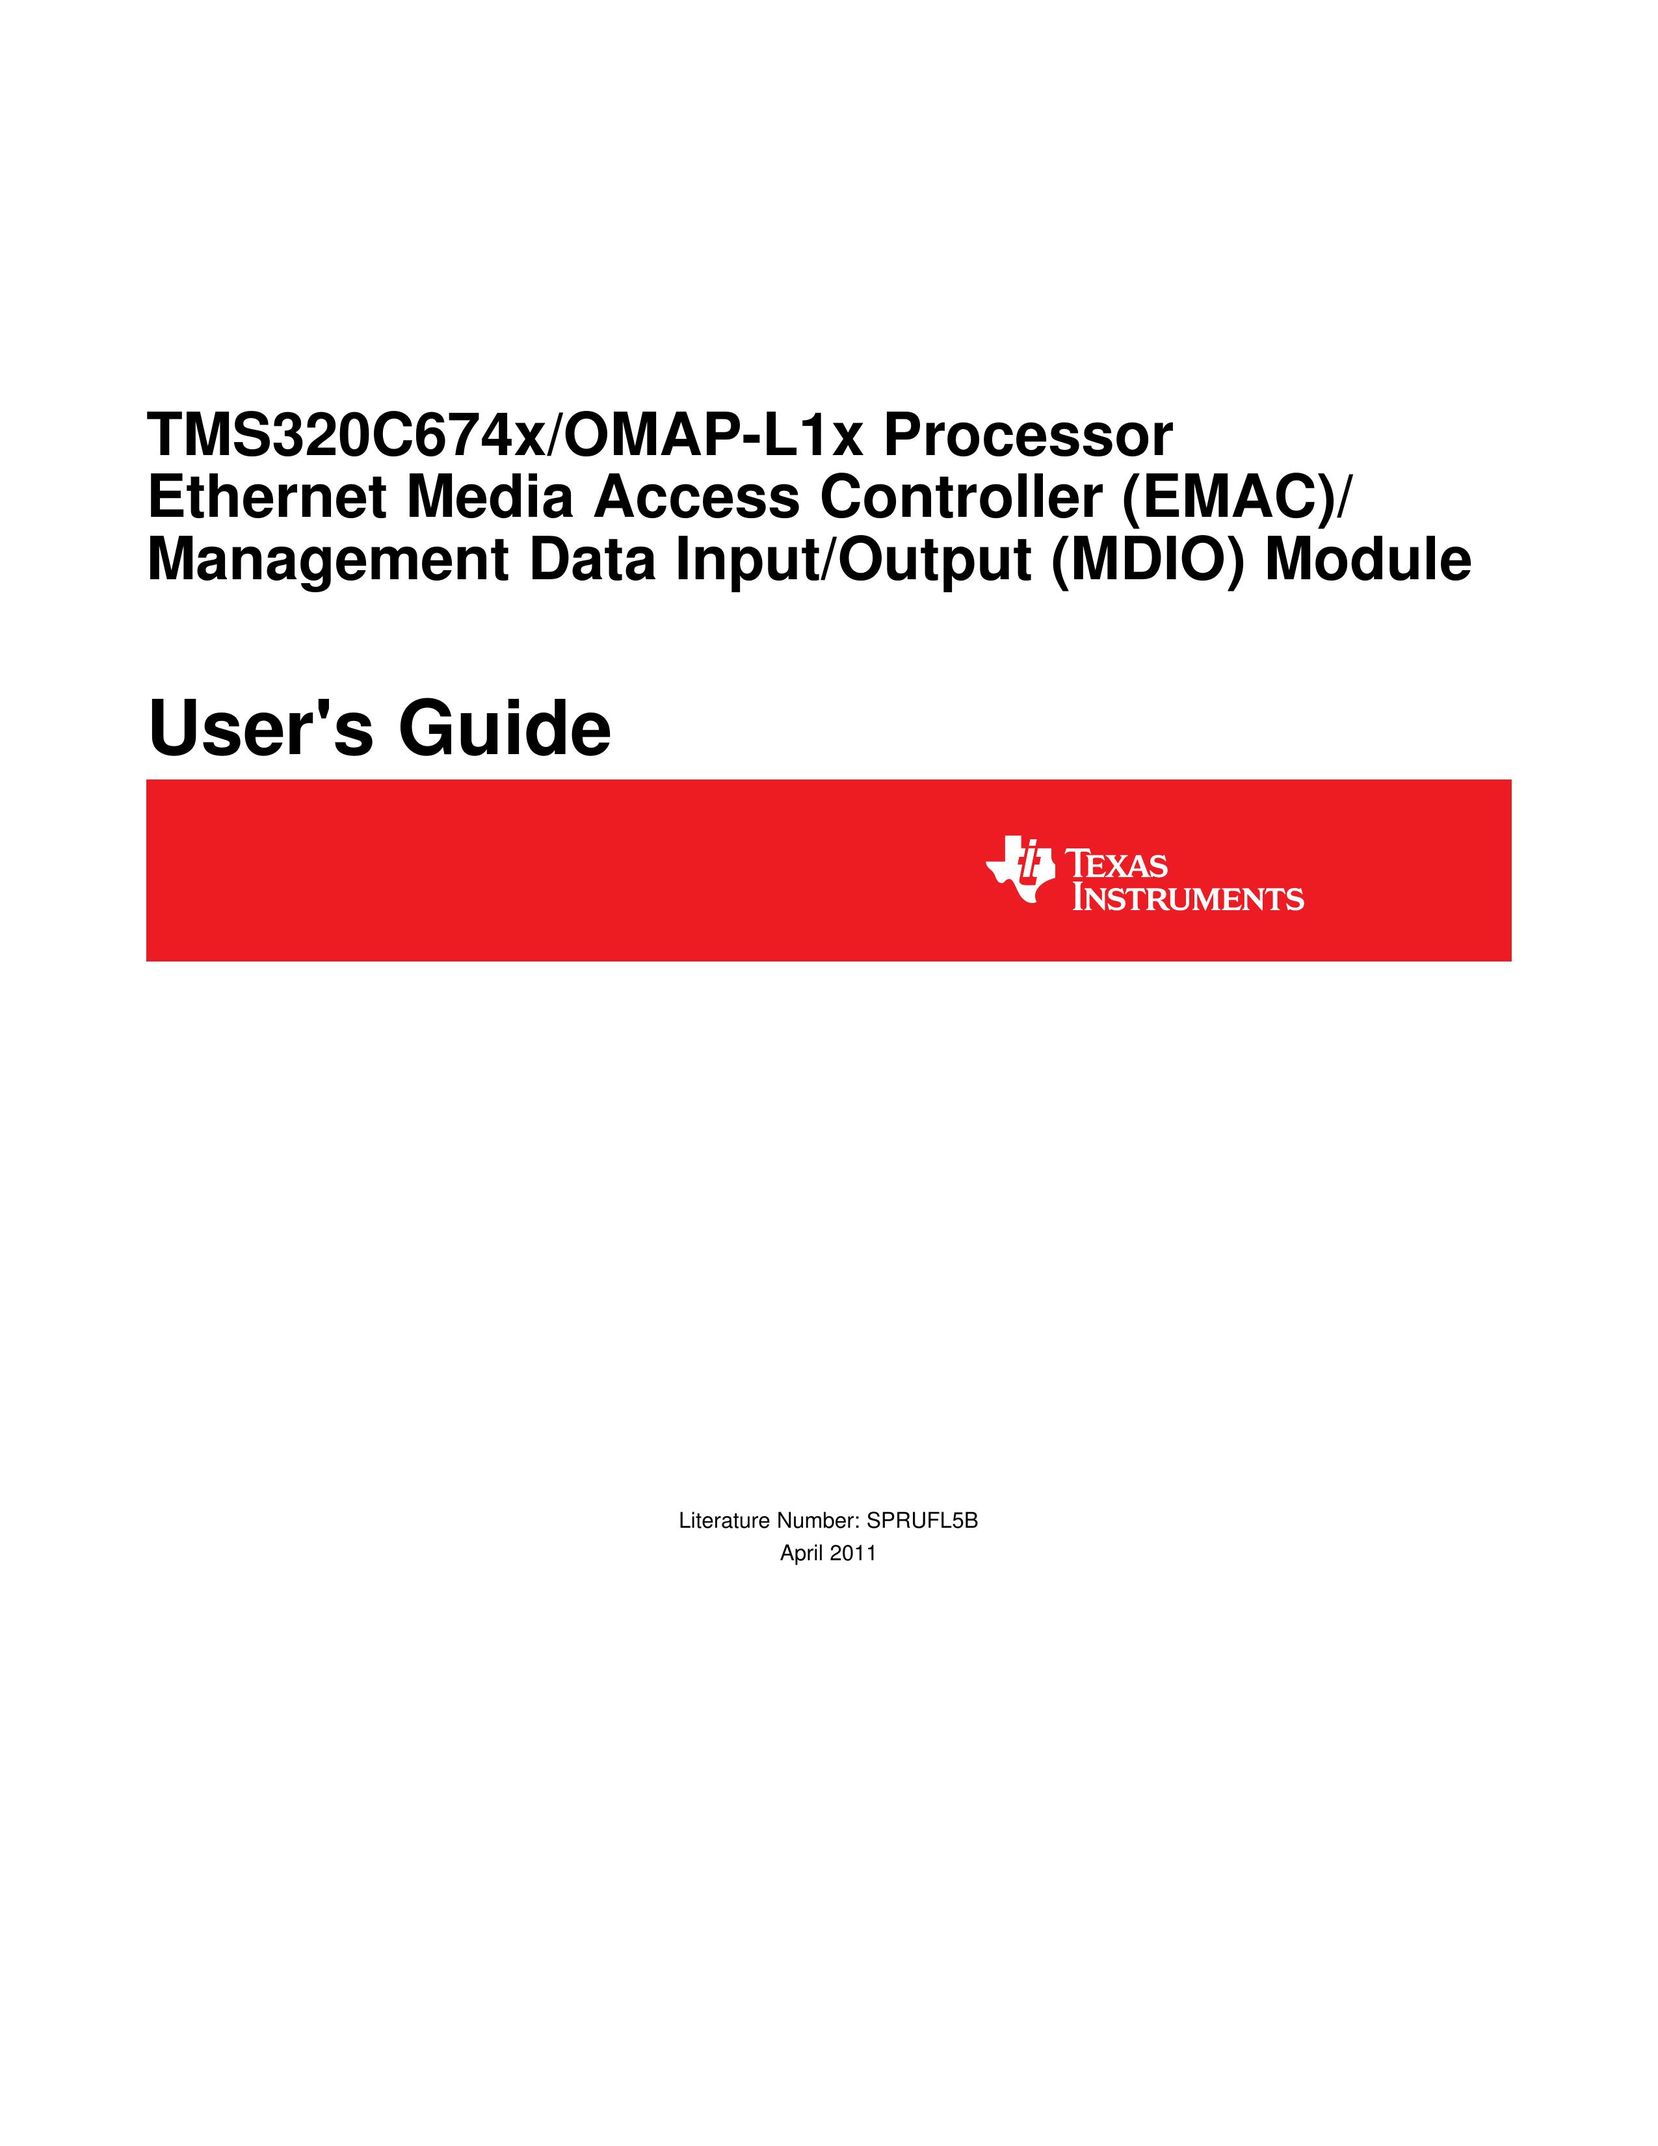 Texas Instruments TMS320C674X Switch User Manual